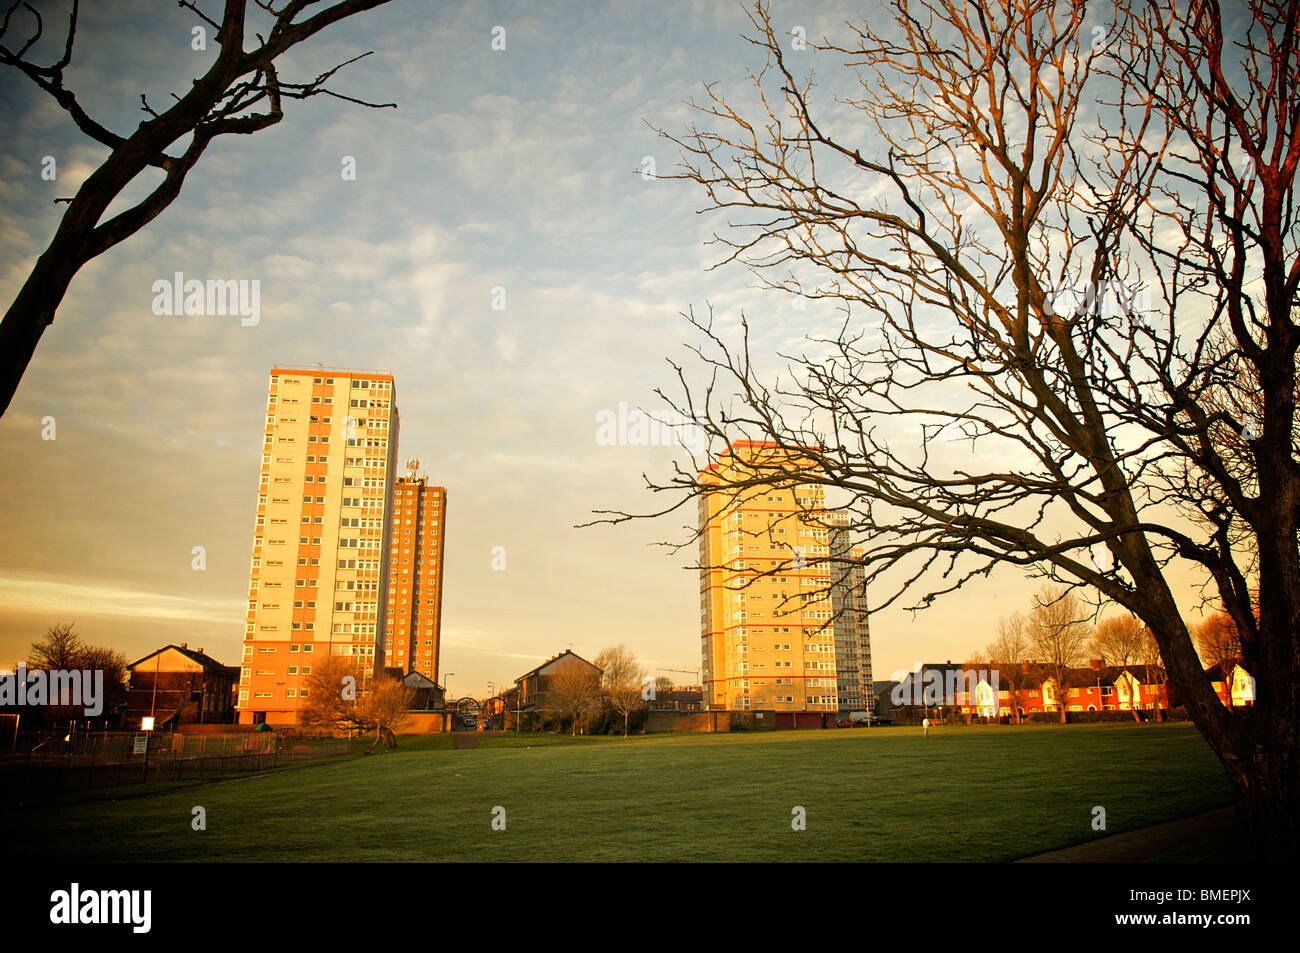 High rise flats at dawn in Layton,Blackpool Stock Photo